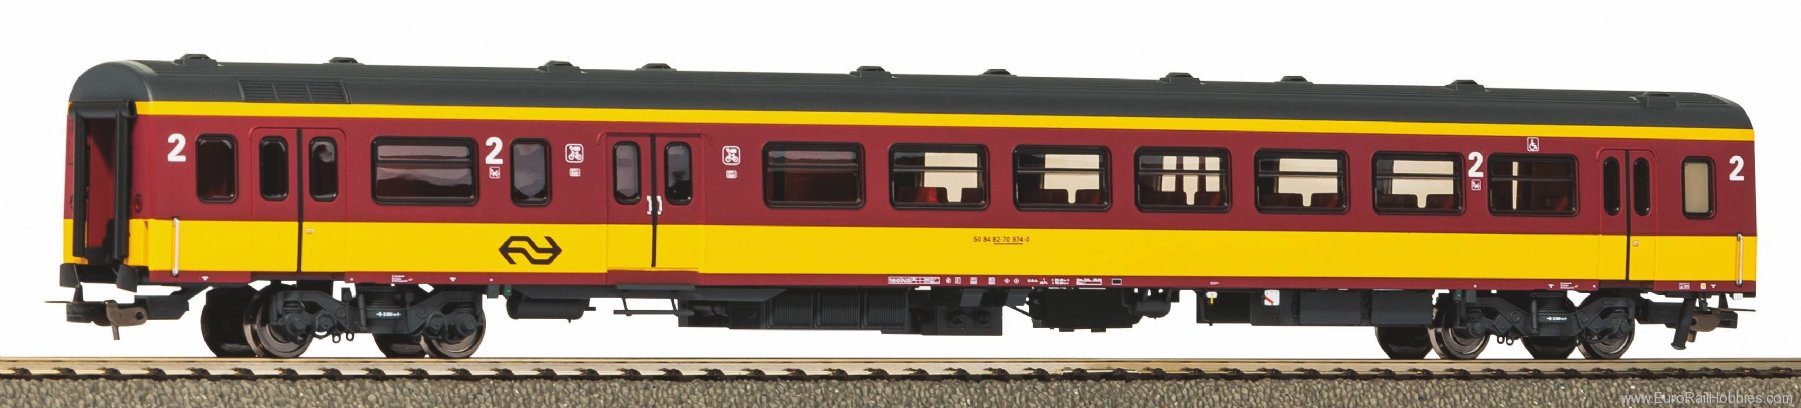 Piko 97644 2nd class ICR passenger coach with luggage co